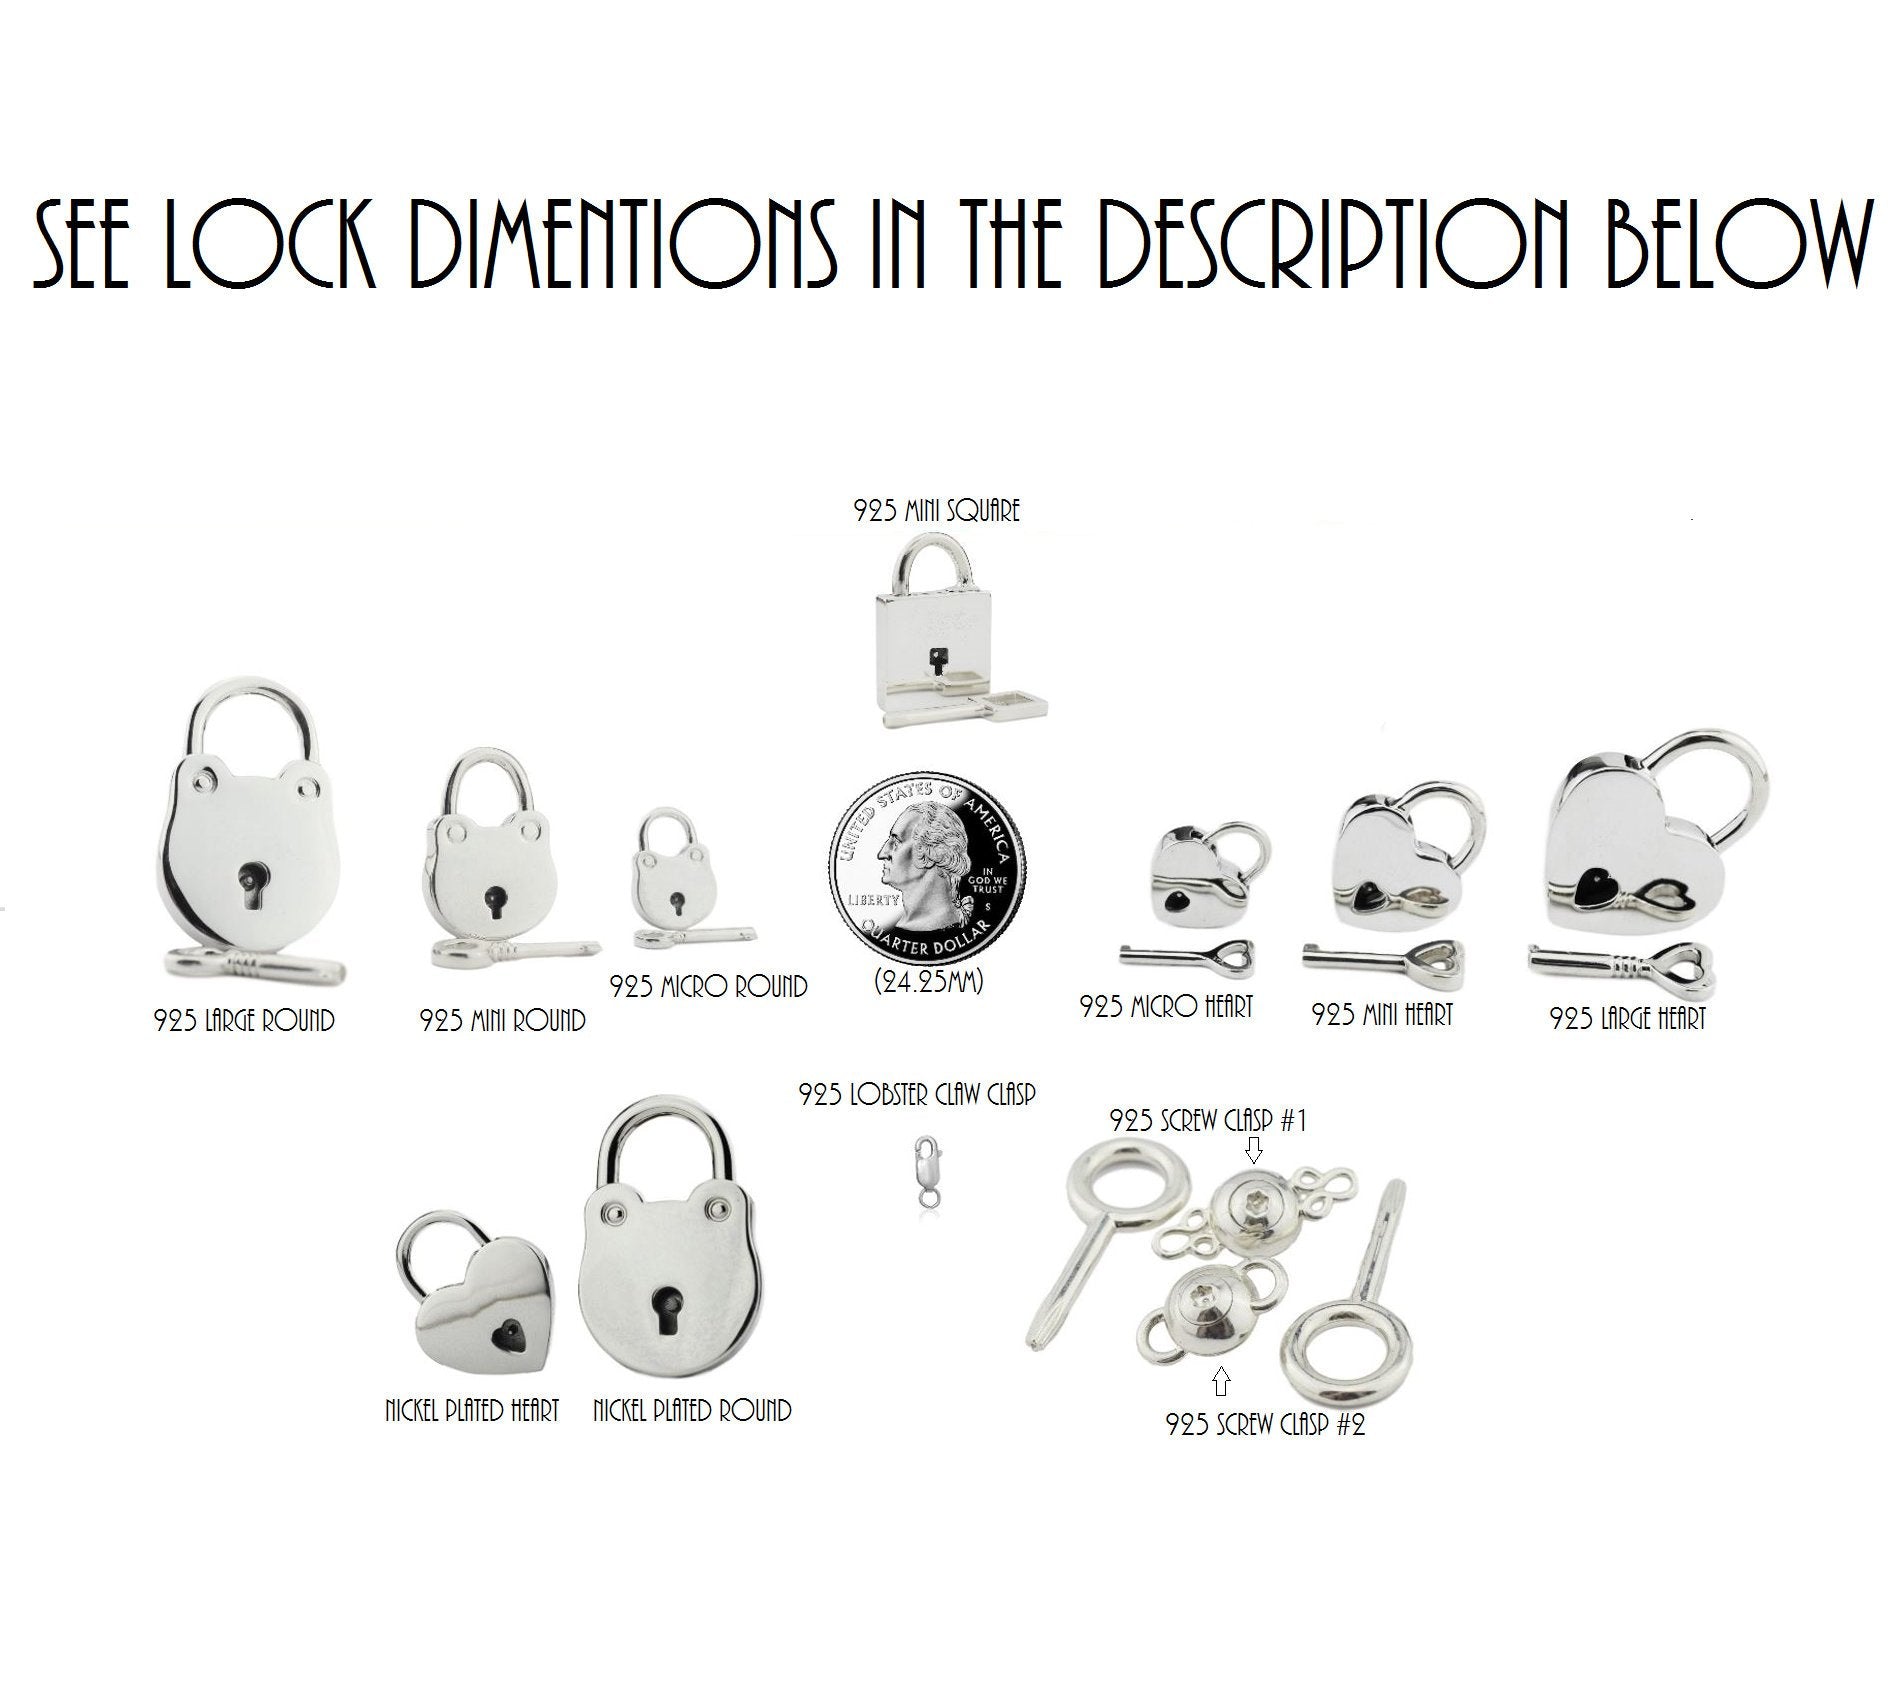 Highest Quality Day Collars in the World! High Grade Leather and 925 Sterling Silver Hypoallergenic Locking, lock, padlock BDSM Cuff Bondage Sub Kink Slave Submissive ToBeHis Engraving